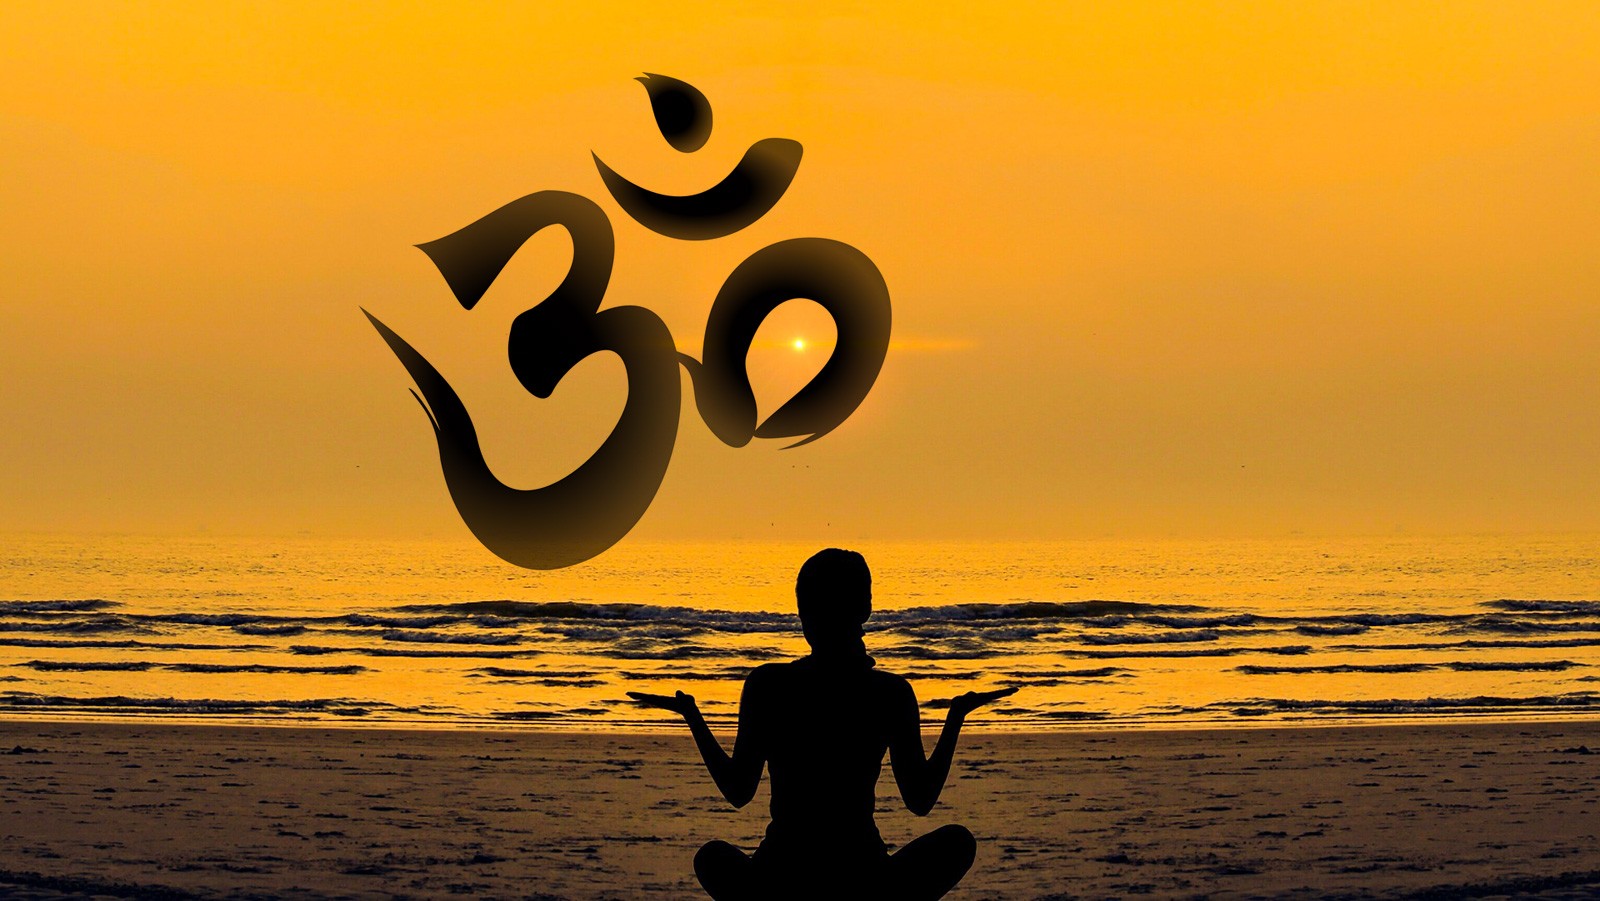 Om Symbol Meaning And Tattoo Ideas On Whats Your Sign